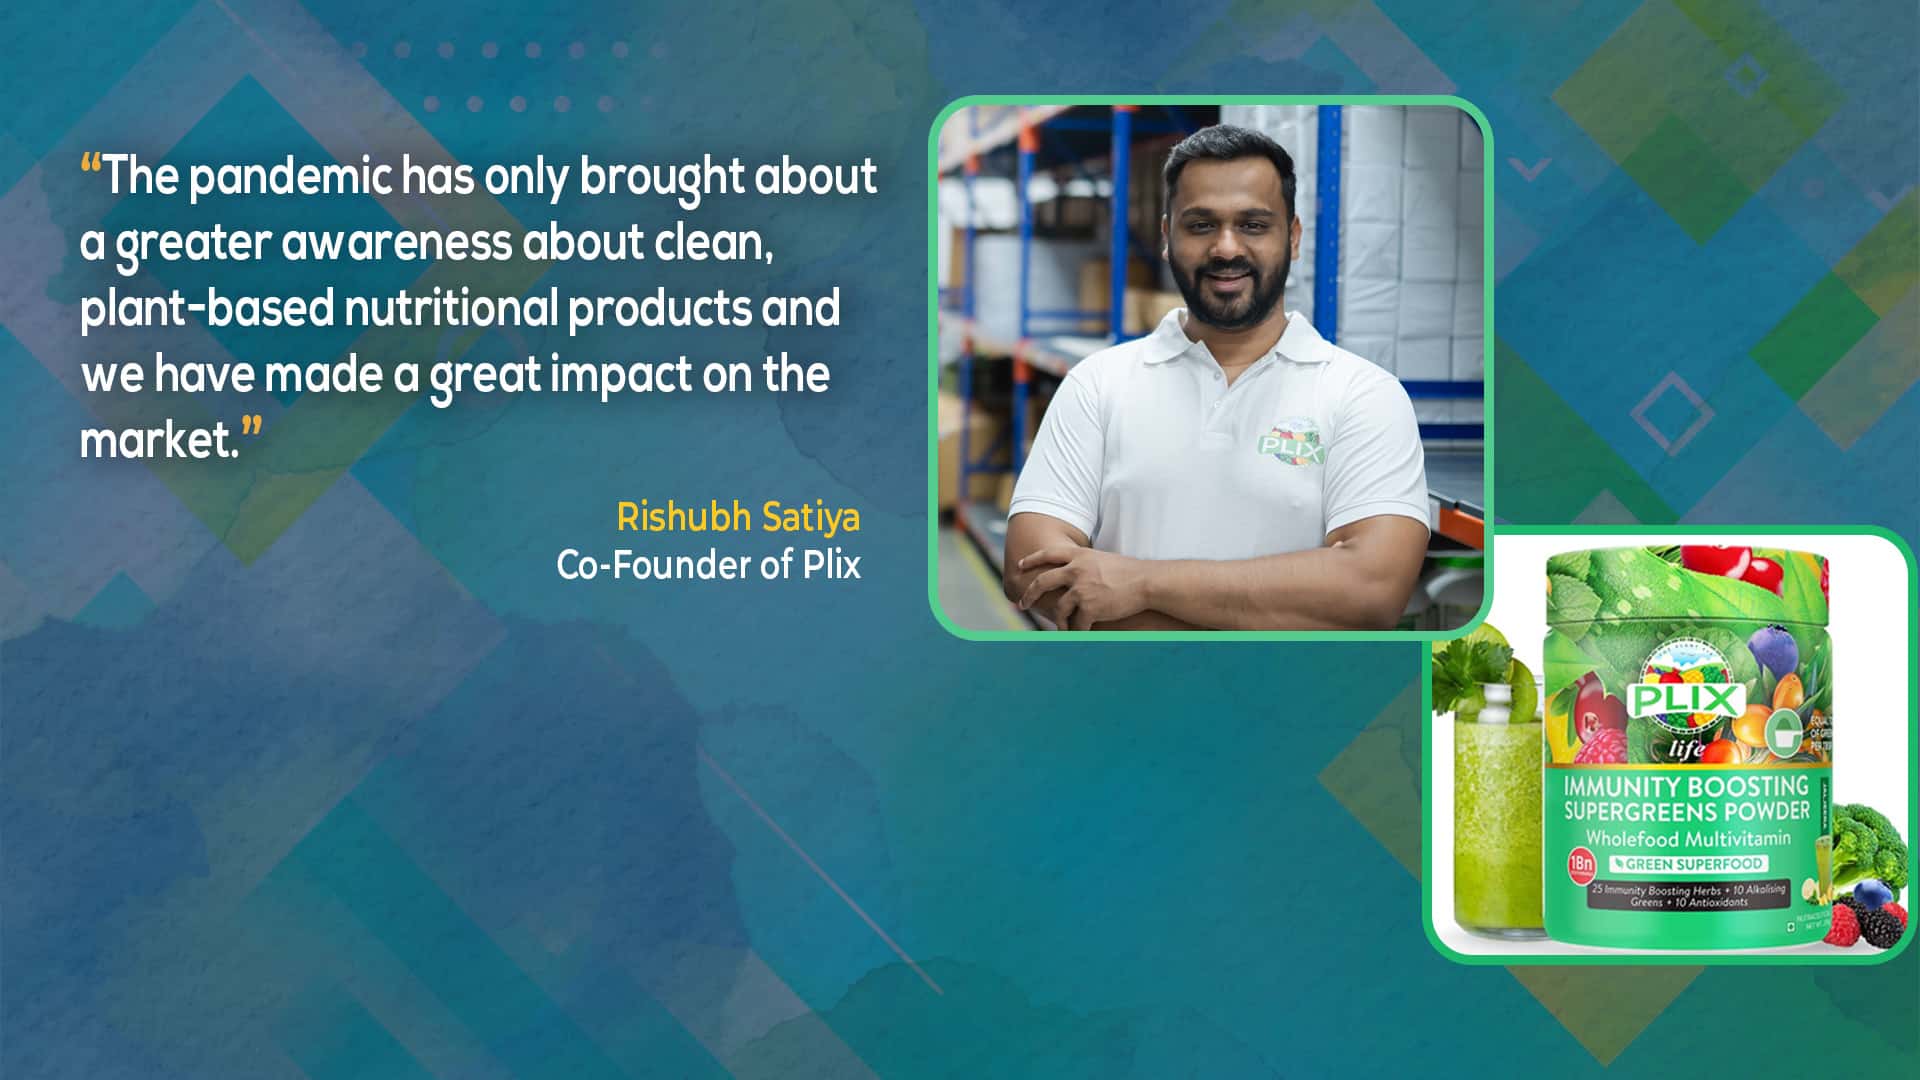 People are paying more attention to their nutritional needs: Rishubh Satiya